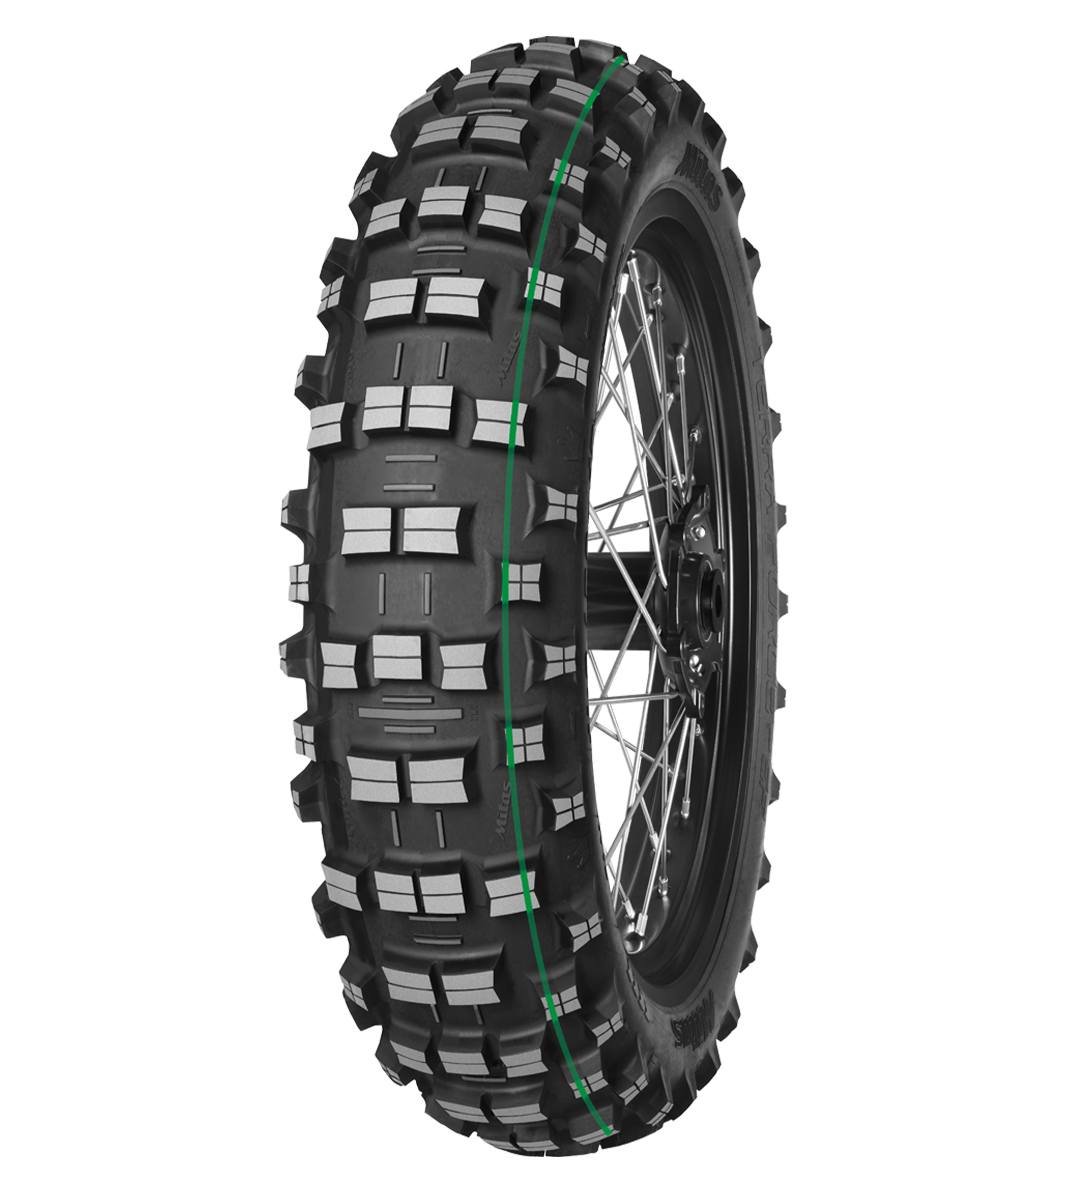 Mitas TERRA FORCE-EF 140/80-18 Enduro Competition Off-Road SUPER LIGHT 70M Green Tube Rear Tire, 226284, 140/80-18, Enduro Competition, Off-Road, Rear, Terra Force, Terra Force-EF, Trail, Tires - Imported and distributed in North & South America by Lindeco Genuine Powersports - Premier Powersports Equipment and Accessories for Motorcycle Enthusiasts, Professional Riders and Dealers.